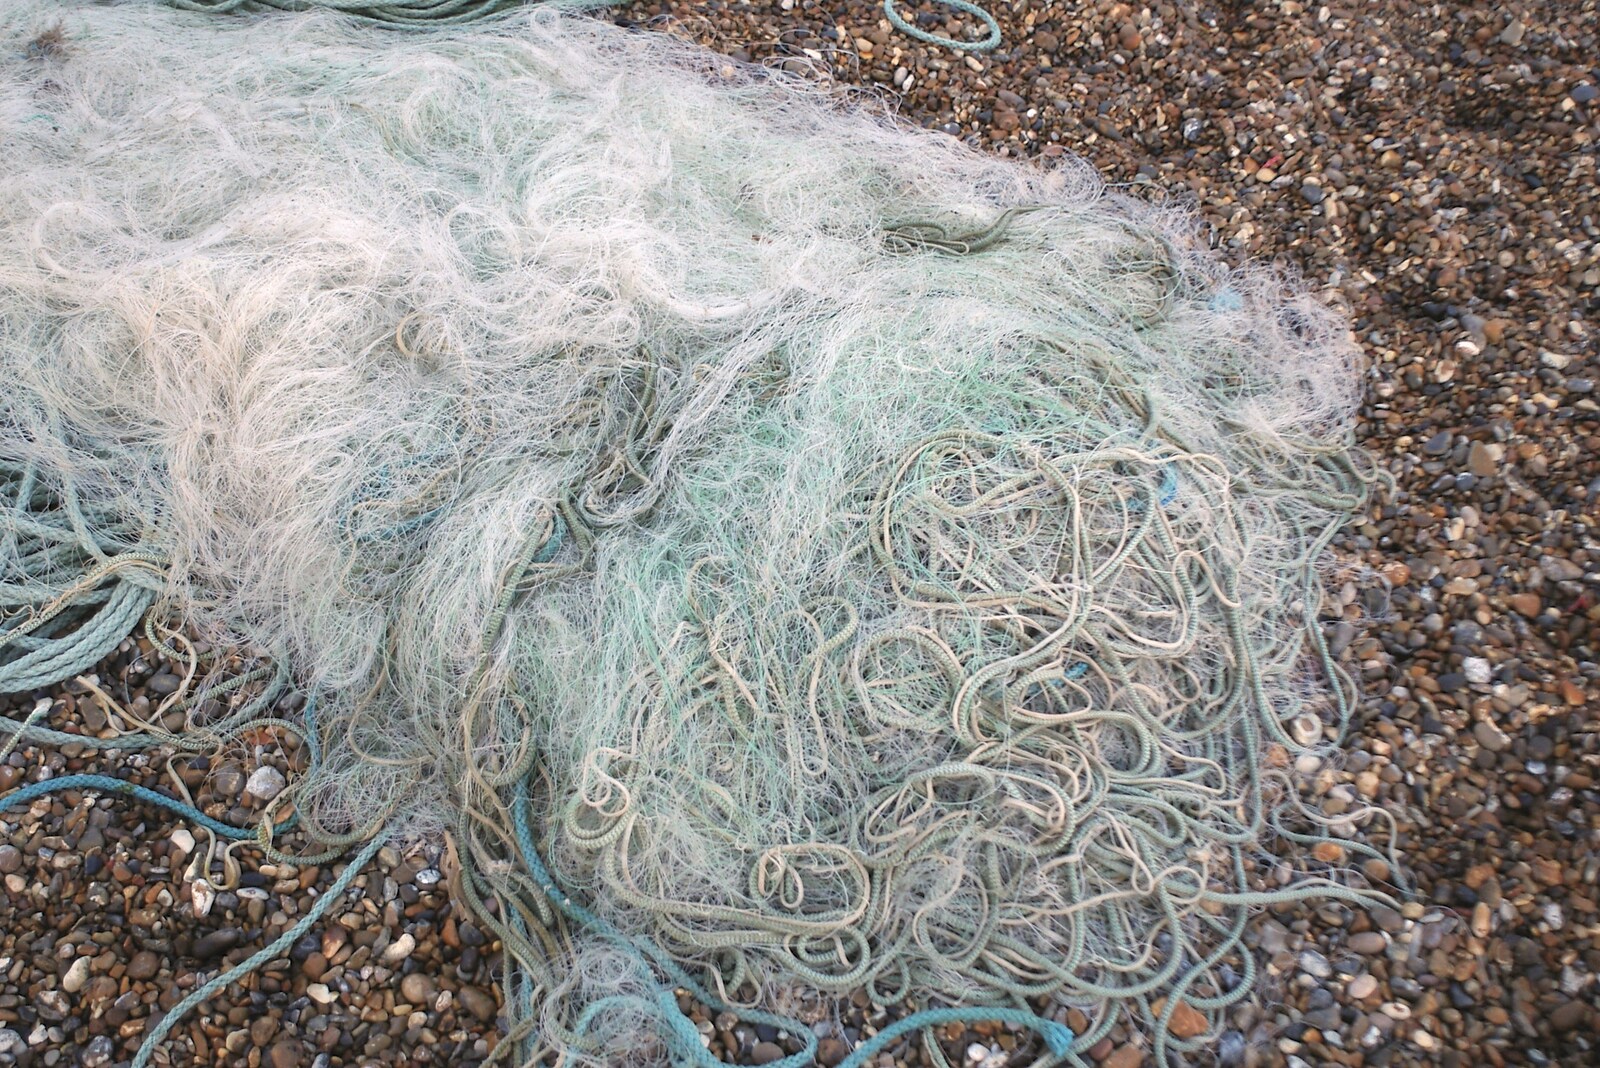 A tangle of discarded net from A Day with Sis, Matt and the Old Man, Saxmundham, Suffolk - 28th December 2004